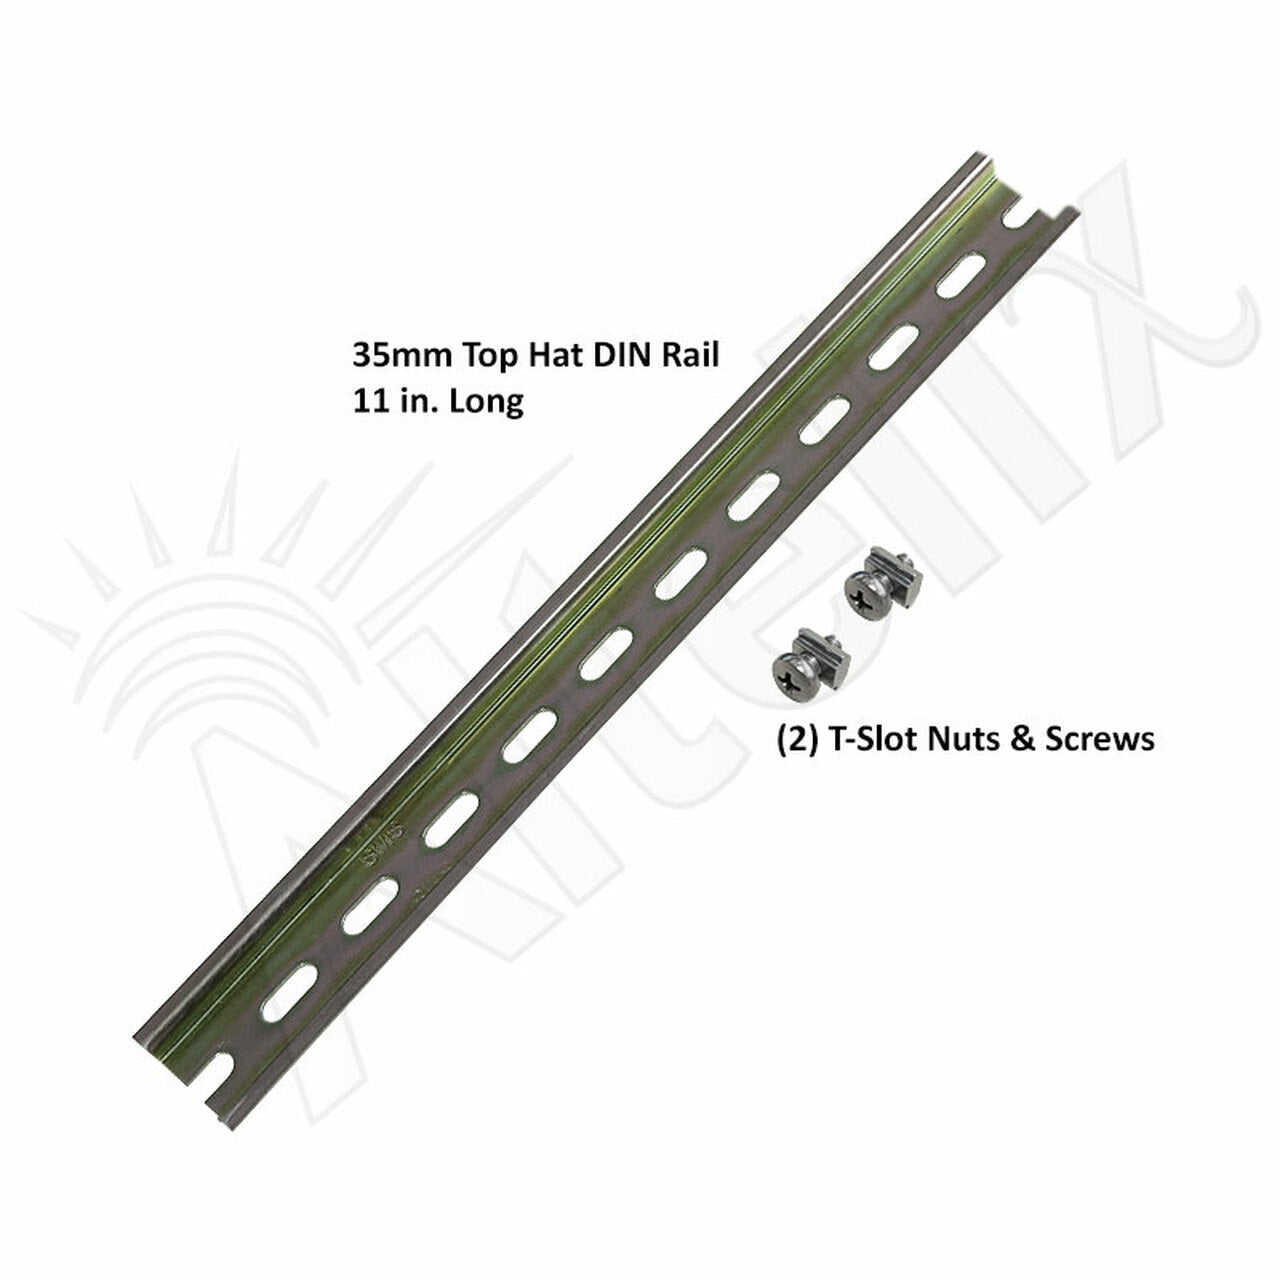 35mm Top Hat DIN Rail Kit for NFC161208 Series Enclosures